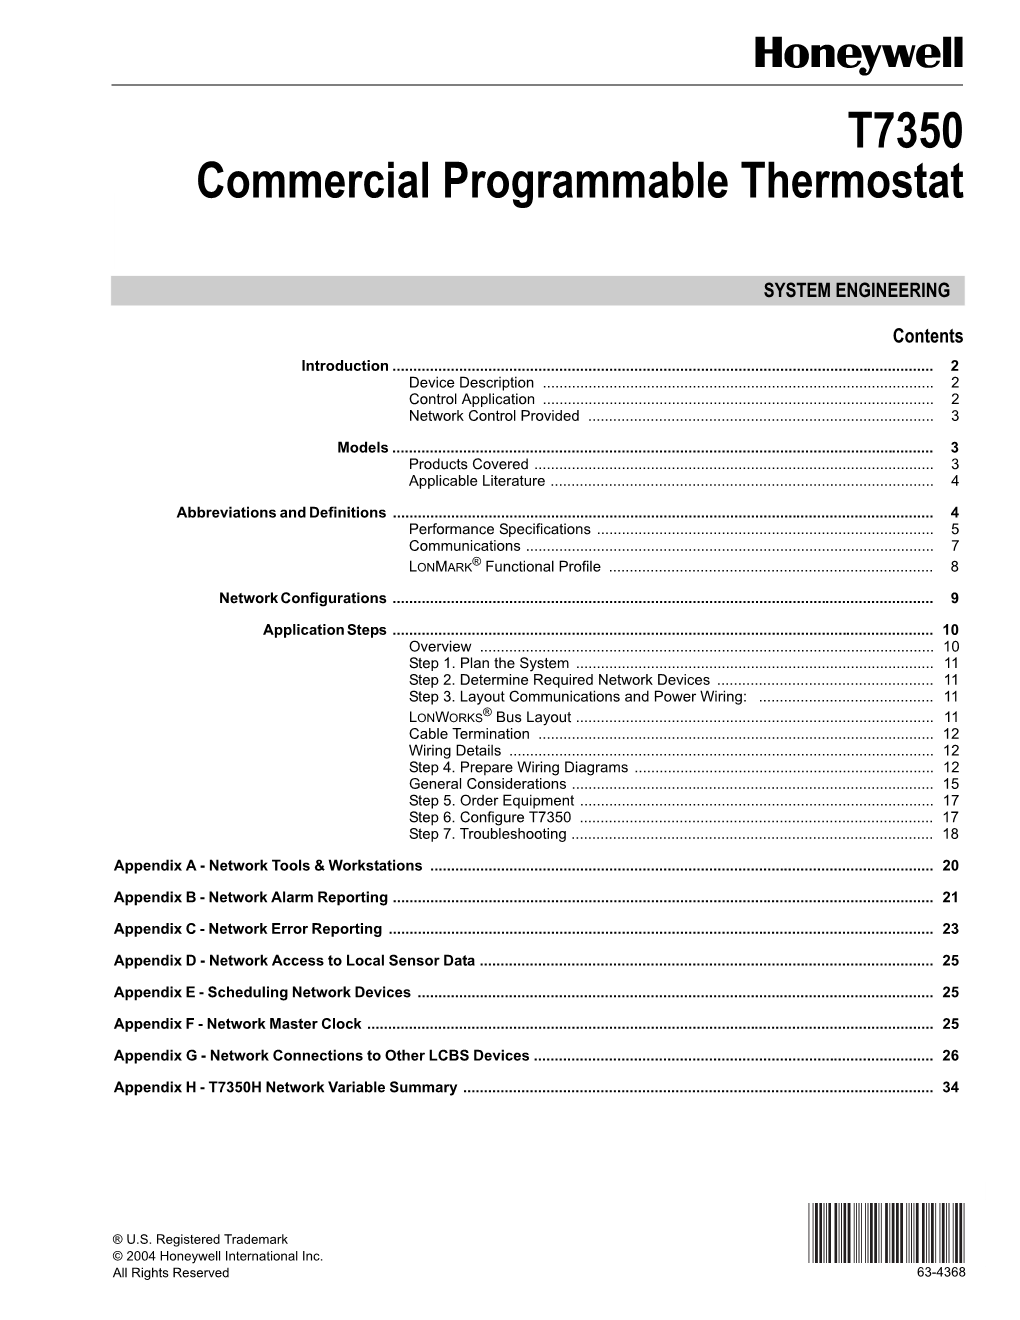 63-4368 T7350 Commercial Programmable Thermostat Introduction